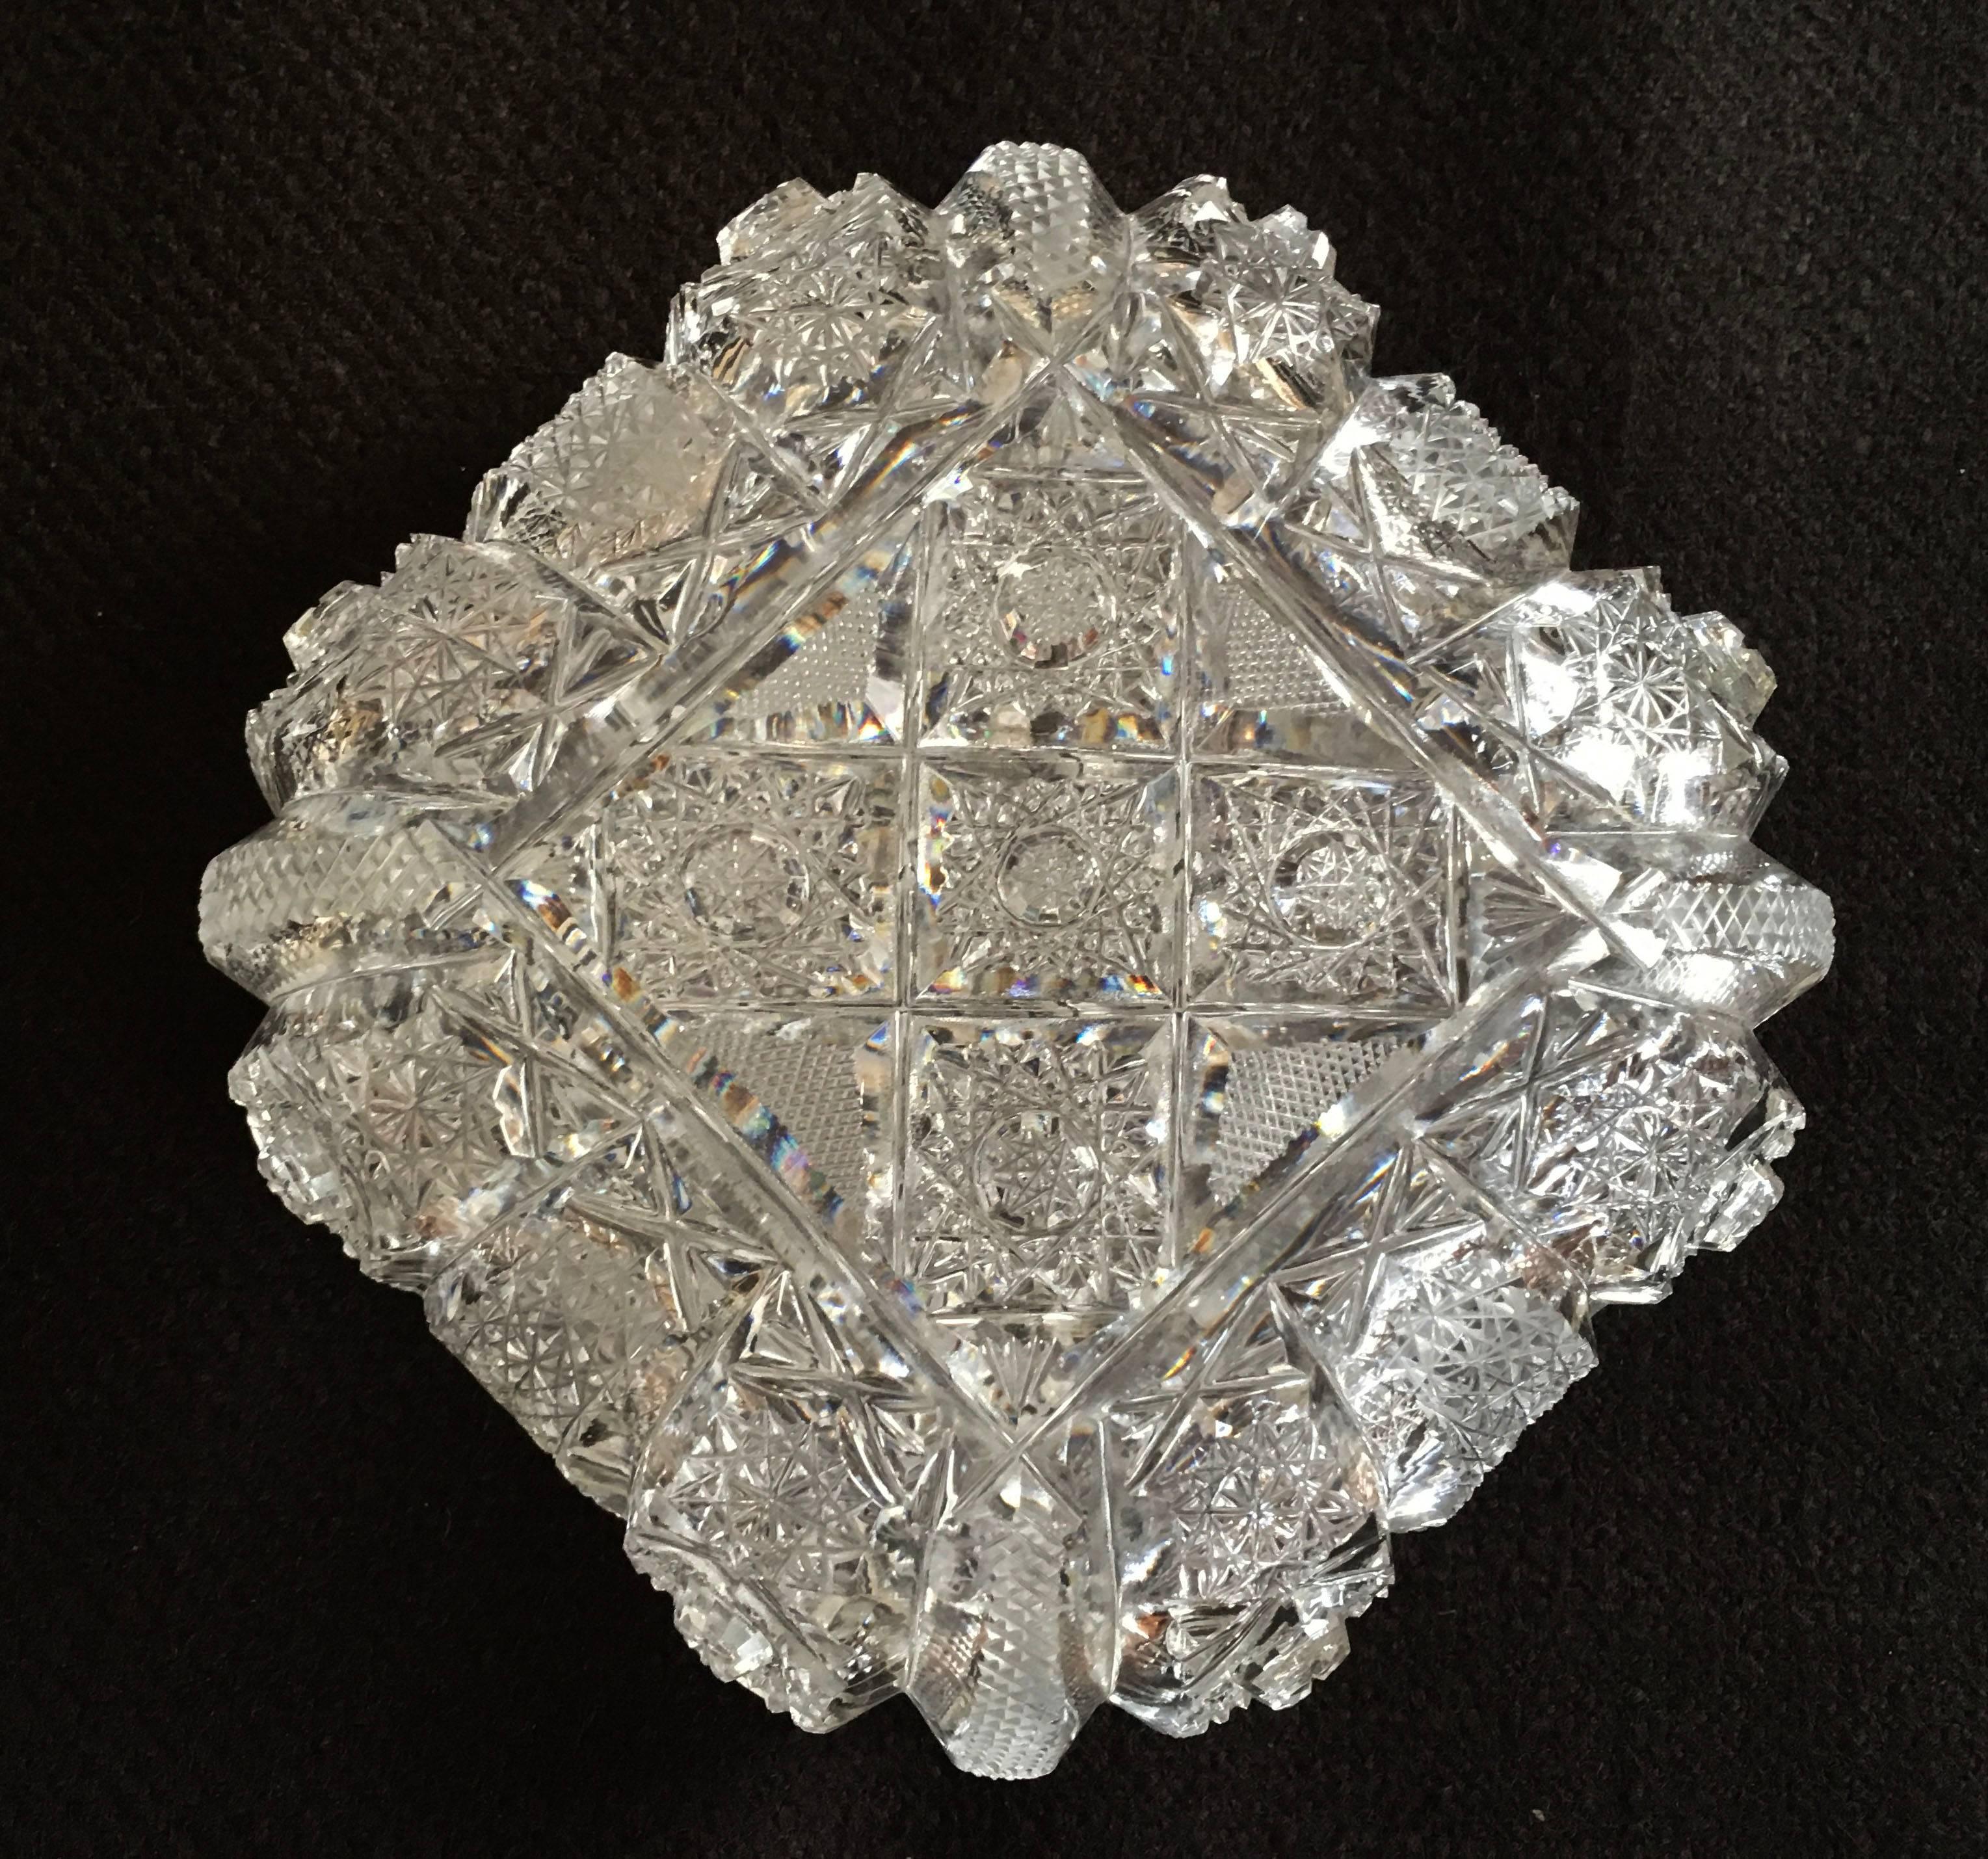 Extravagant square cut and polished crystal box made circa 1970s in one of the Bohemian Glass Works. The cutting is especially fine and deep with the very intricate patterns. Designed to be used for the centre table.